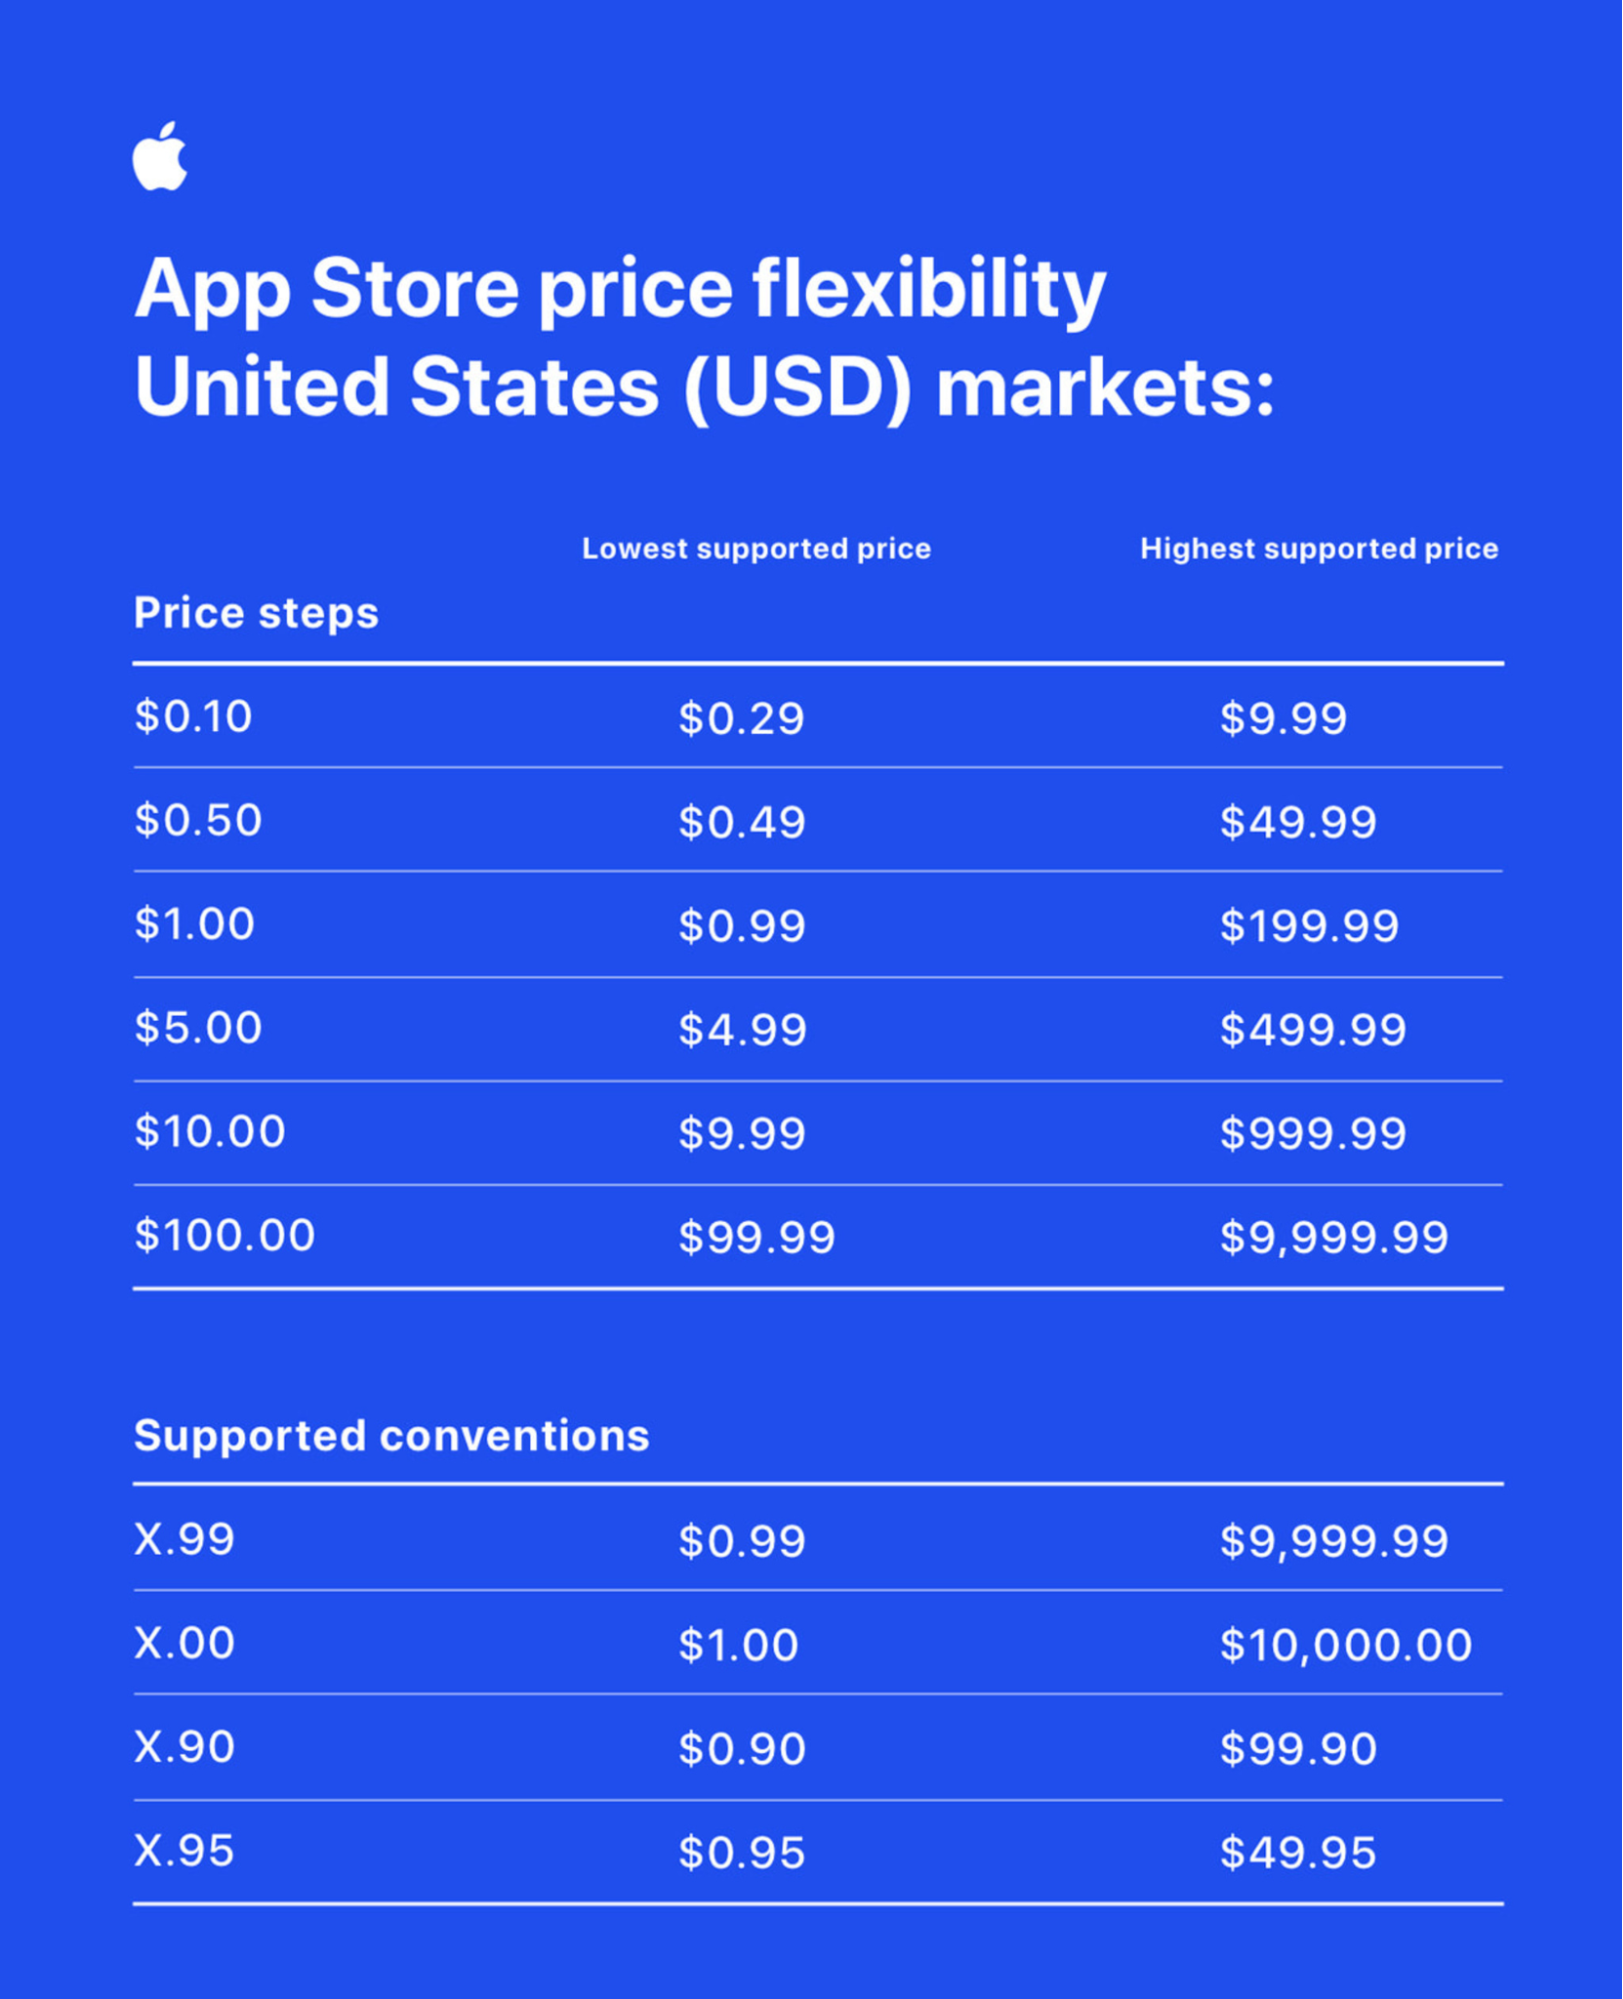 App Store price flexibility in the United States